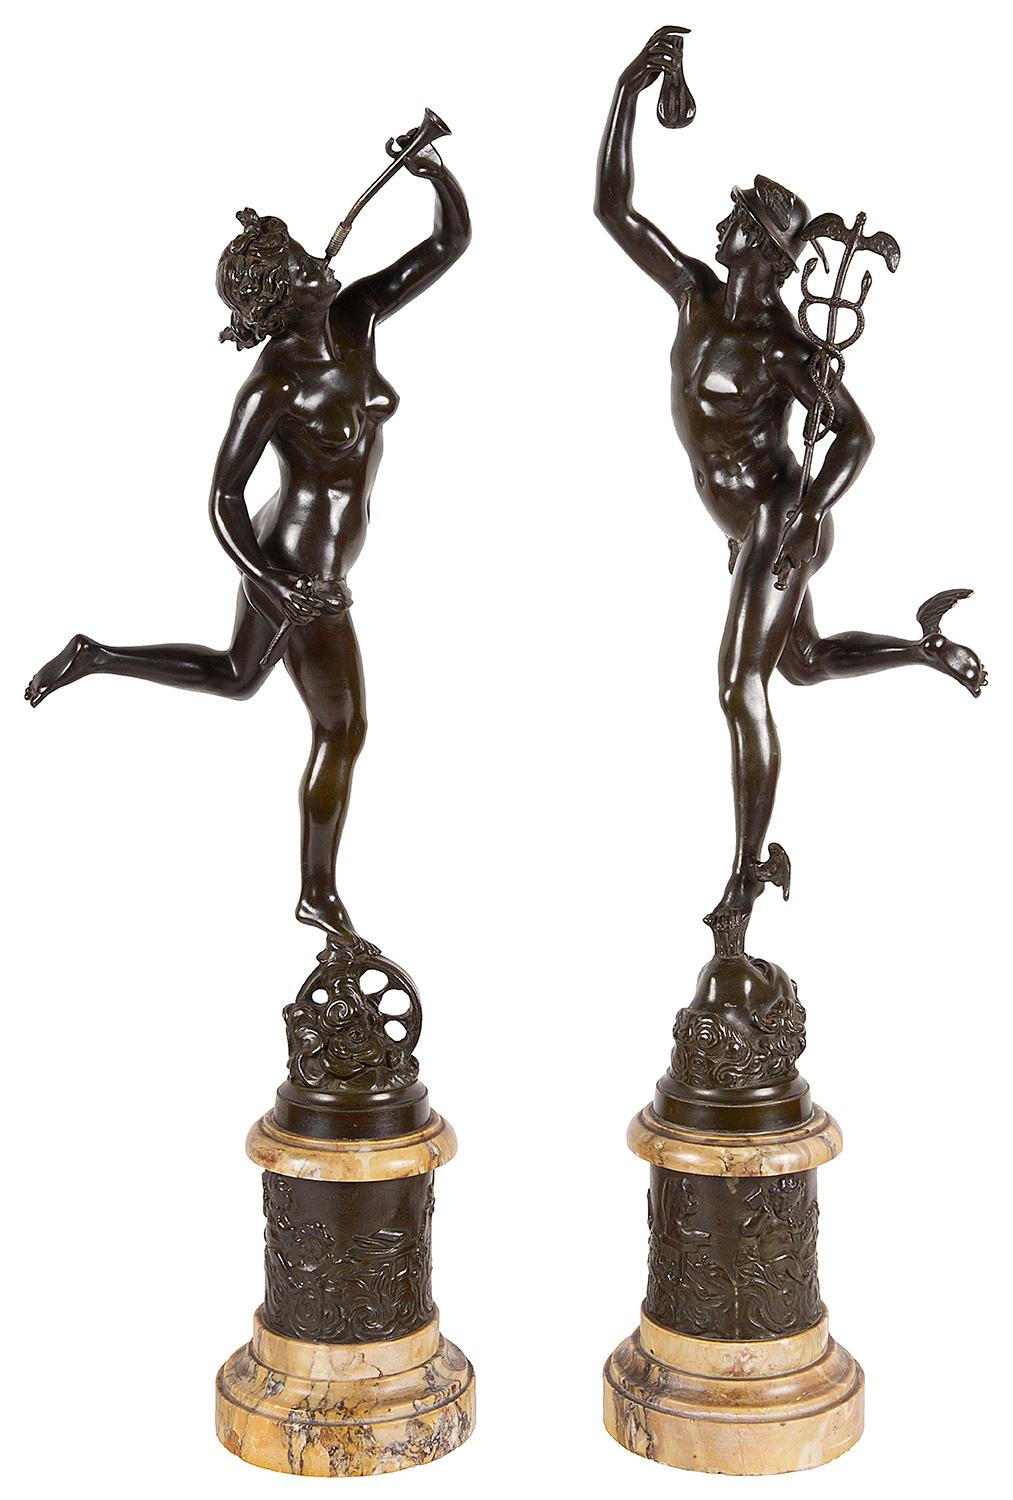 A very impressive pair of 19th century bronze statues of Mercury and Fortuna, after Giambologna. Measures: 32